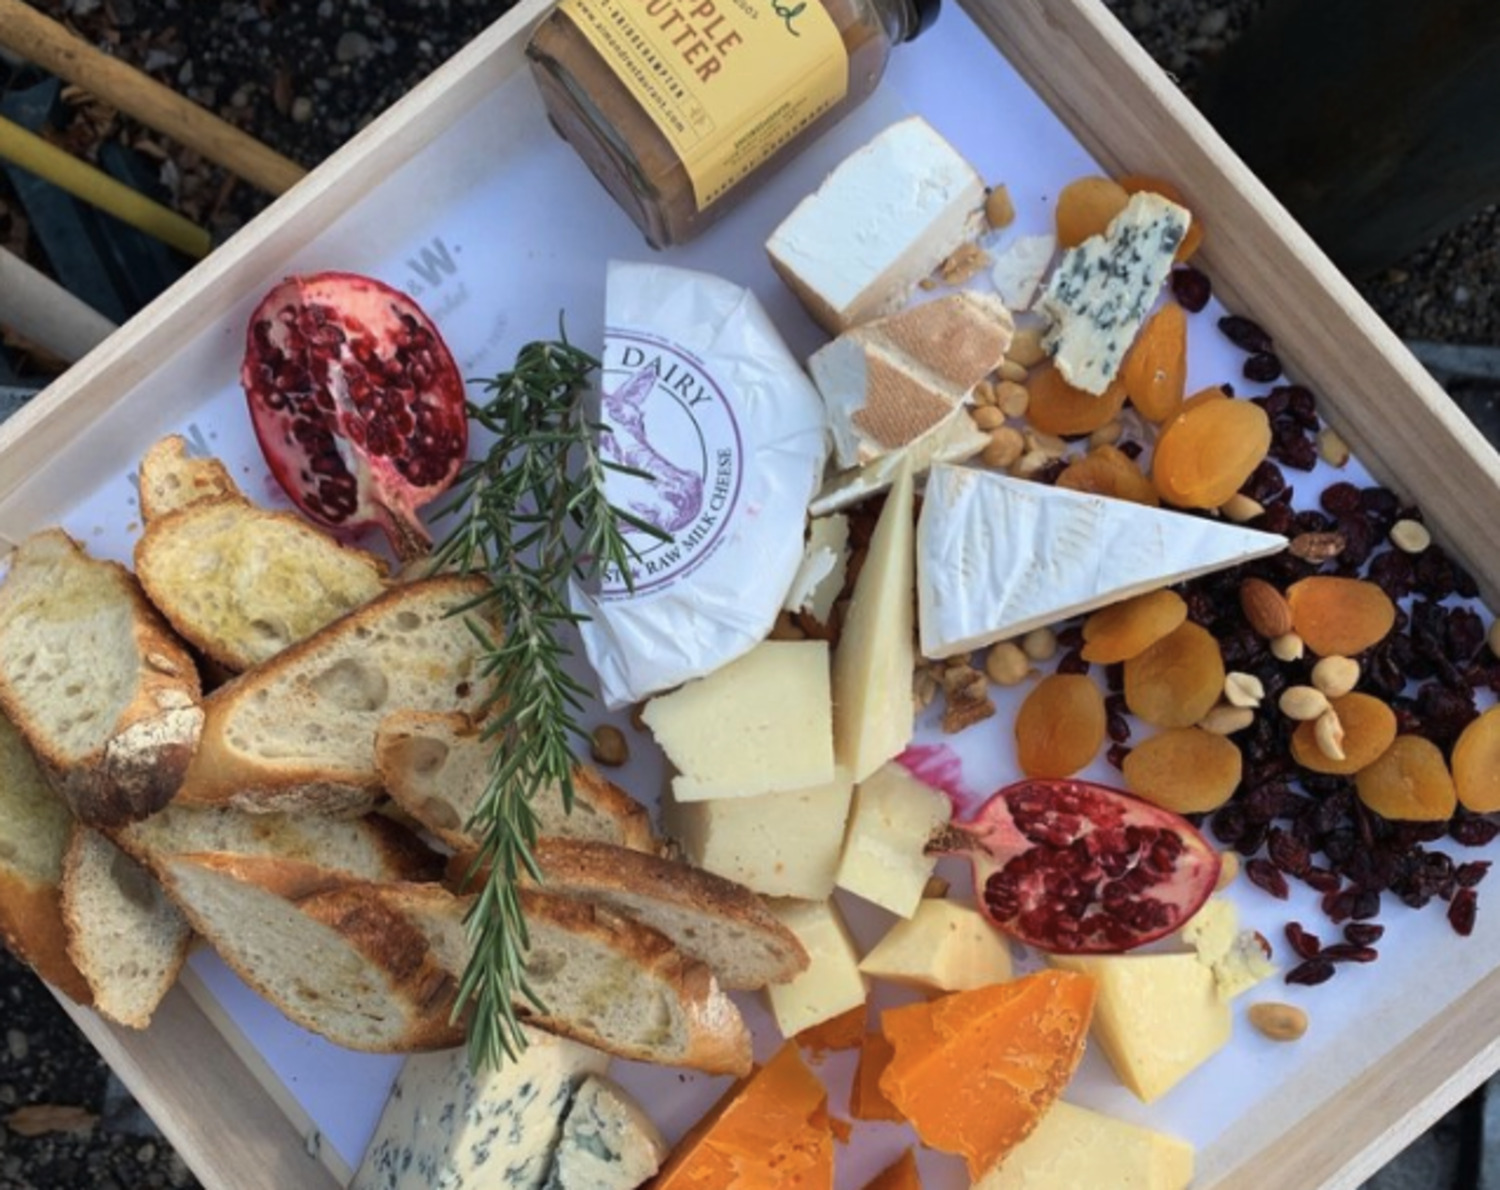 L&W Market's in cheese board is on the menu for Easter. COURTESY L&W MARKET